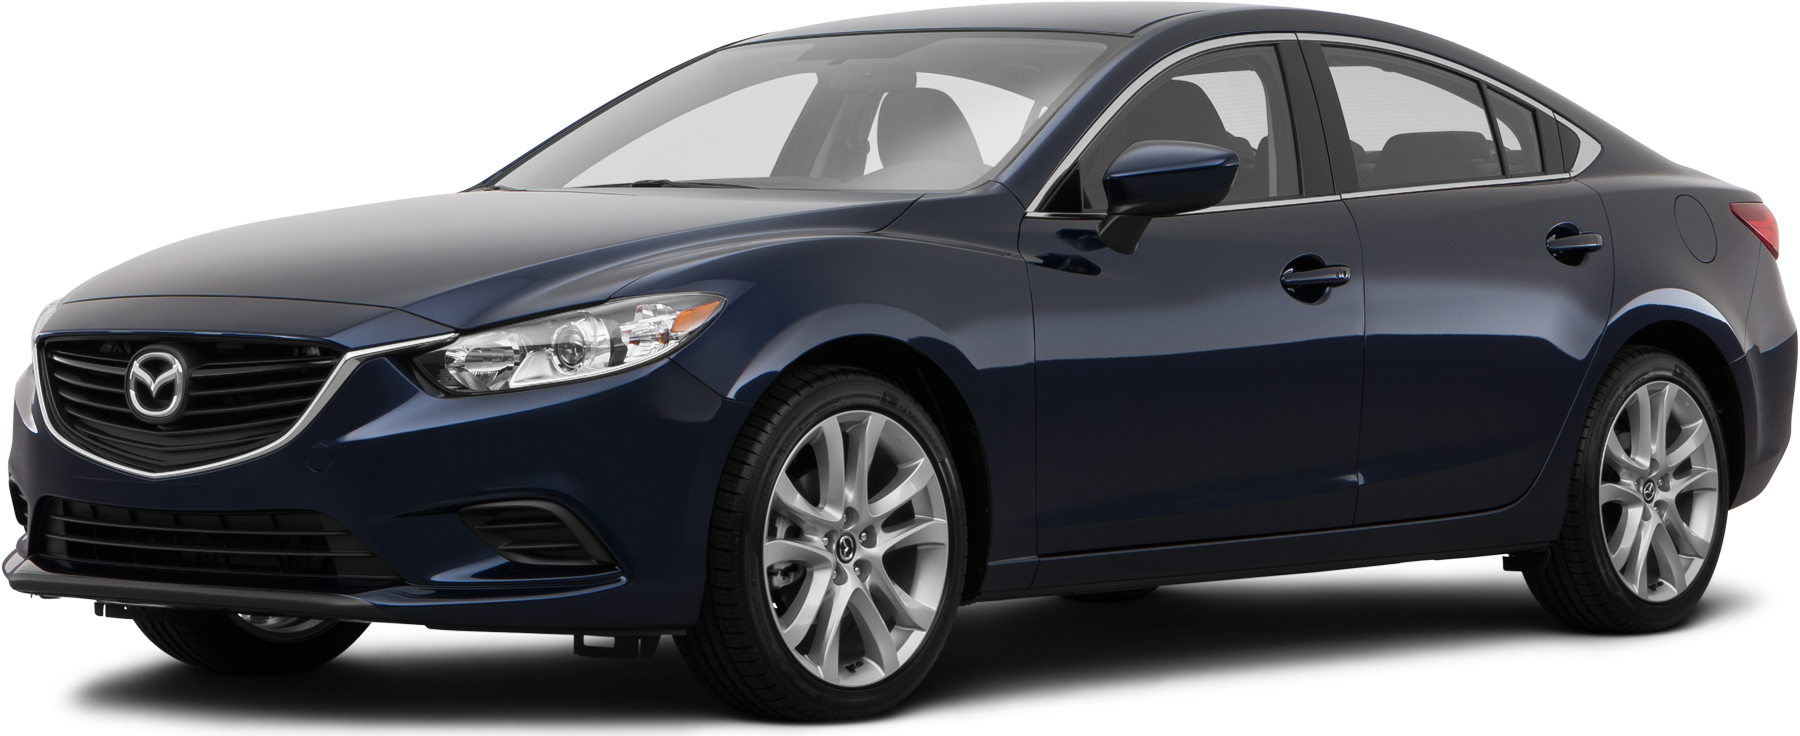 2015 Toyota Camry vs 2015 Mazda6 Which Is Better  Autotrader